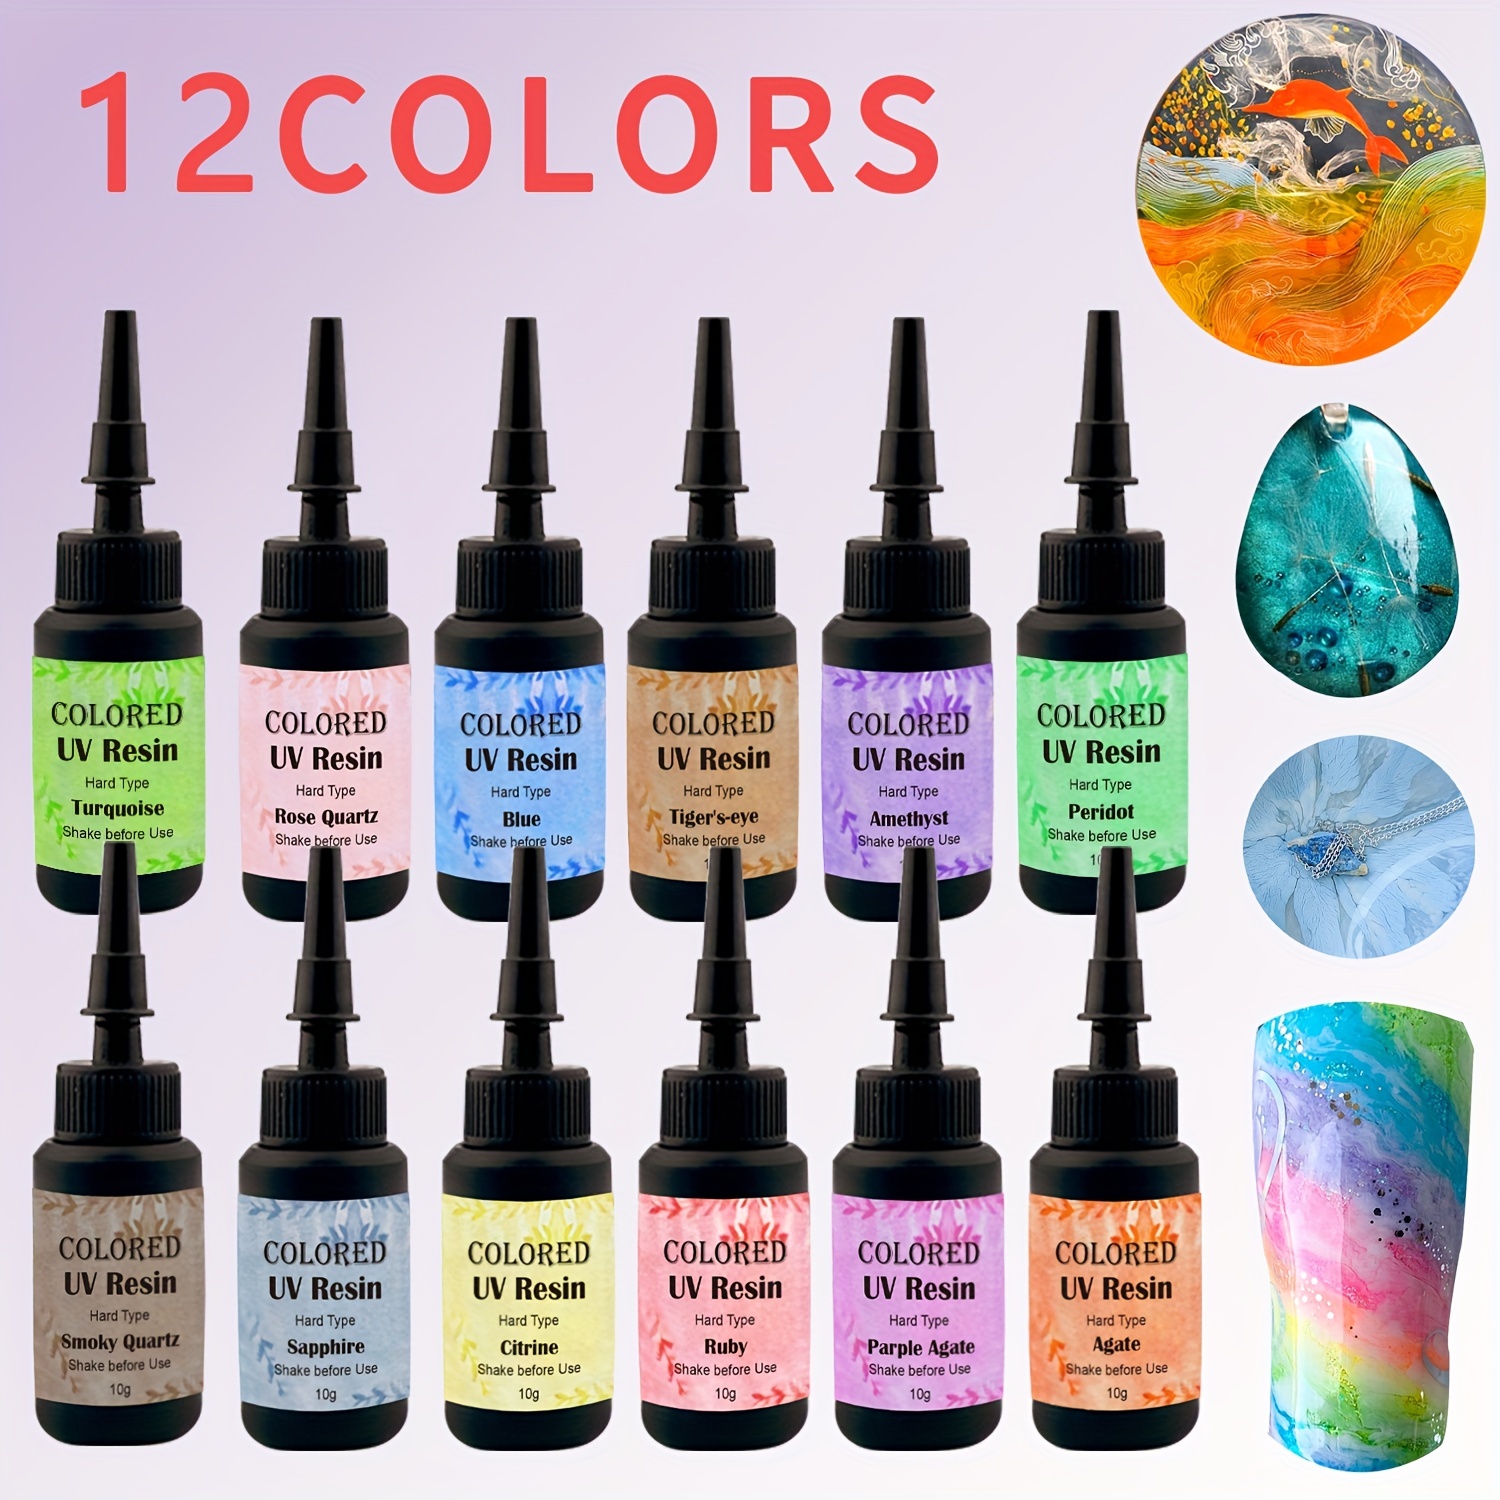  Colored Resin UV Resin Casting Gel Glue Set For Handmade DIY  Silicone Muold Pendants Earrings Necklace Bracelets Making, No Pigments  Needed, 500ml No Mixing, Choose Any 5 Colors